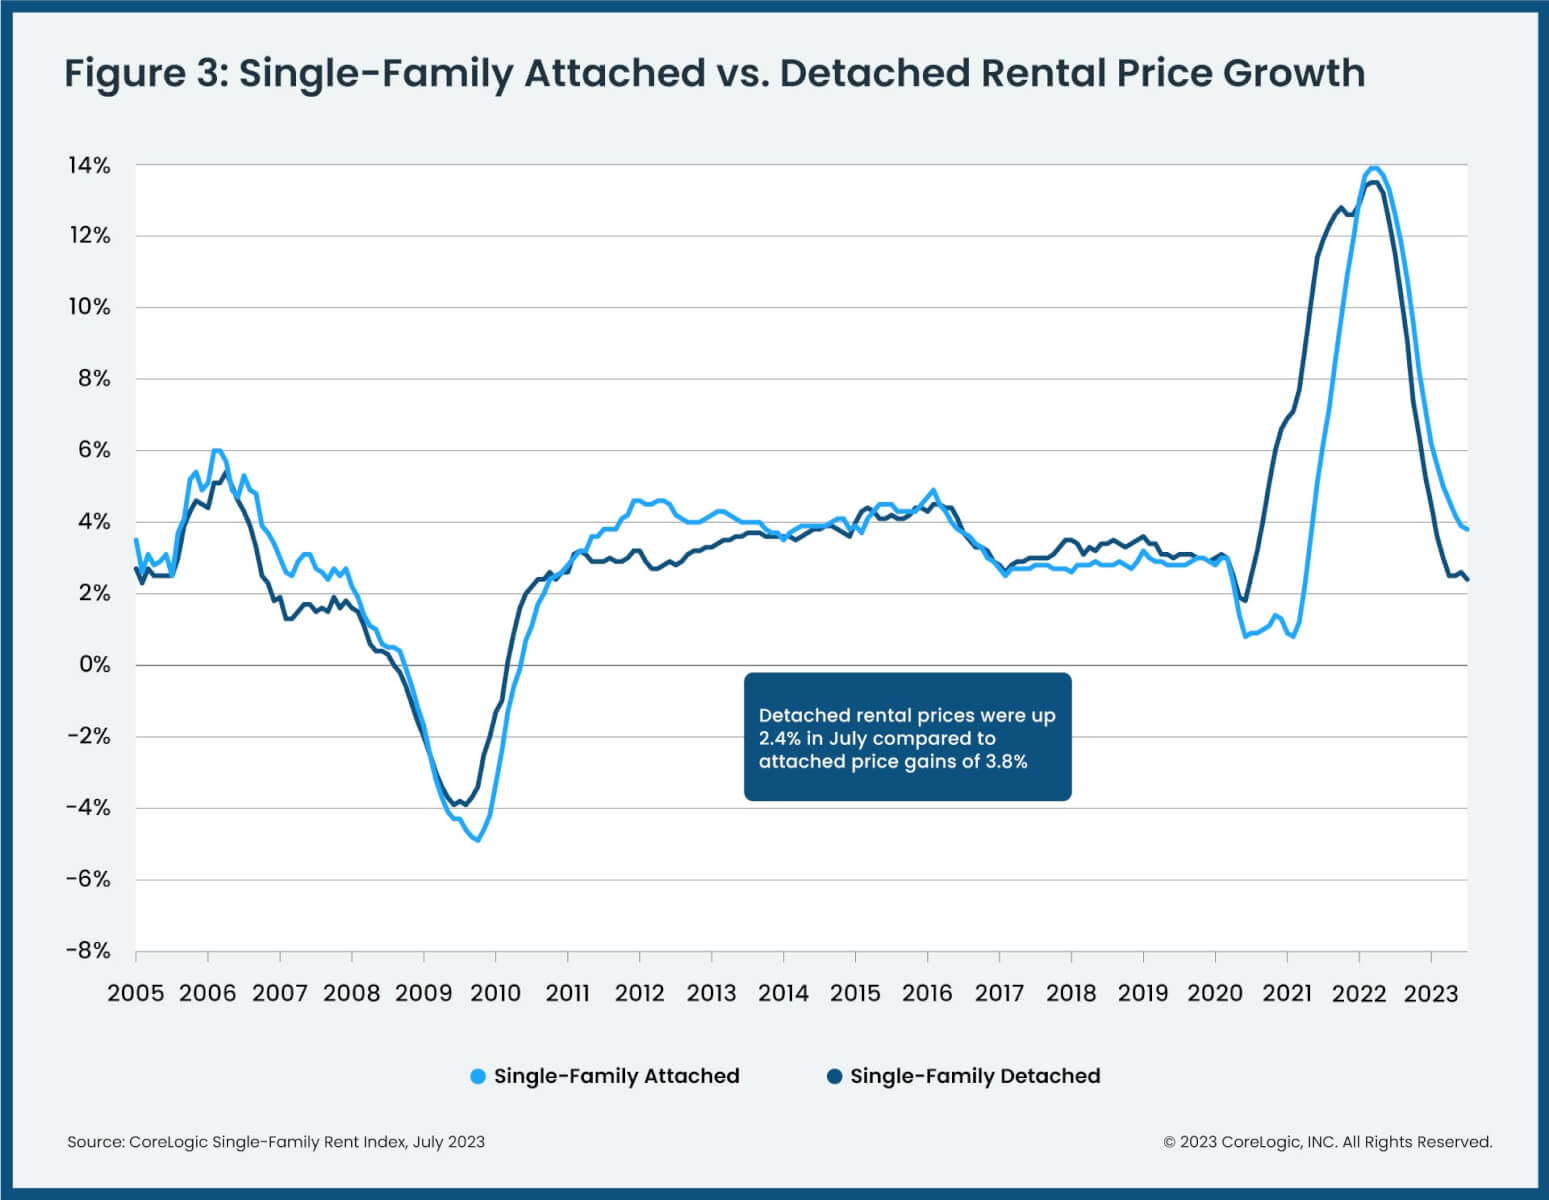 Attached versus detached U.S. single-family rent growth, 2005-2023